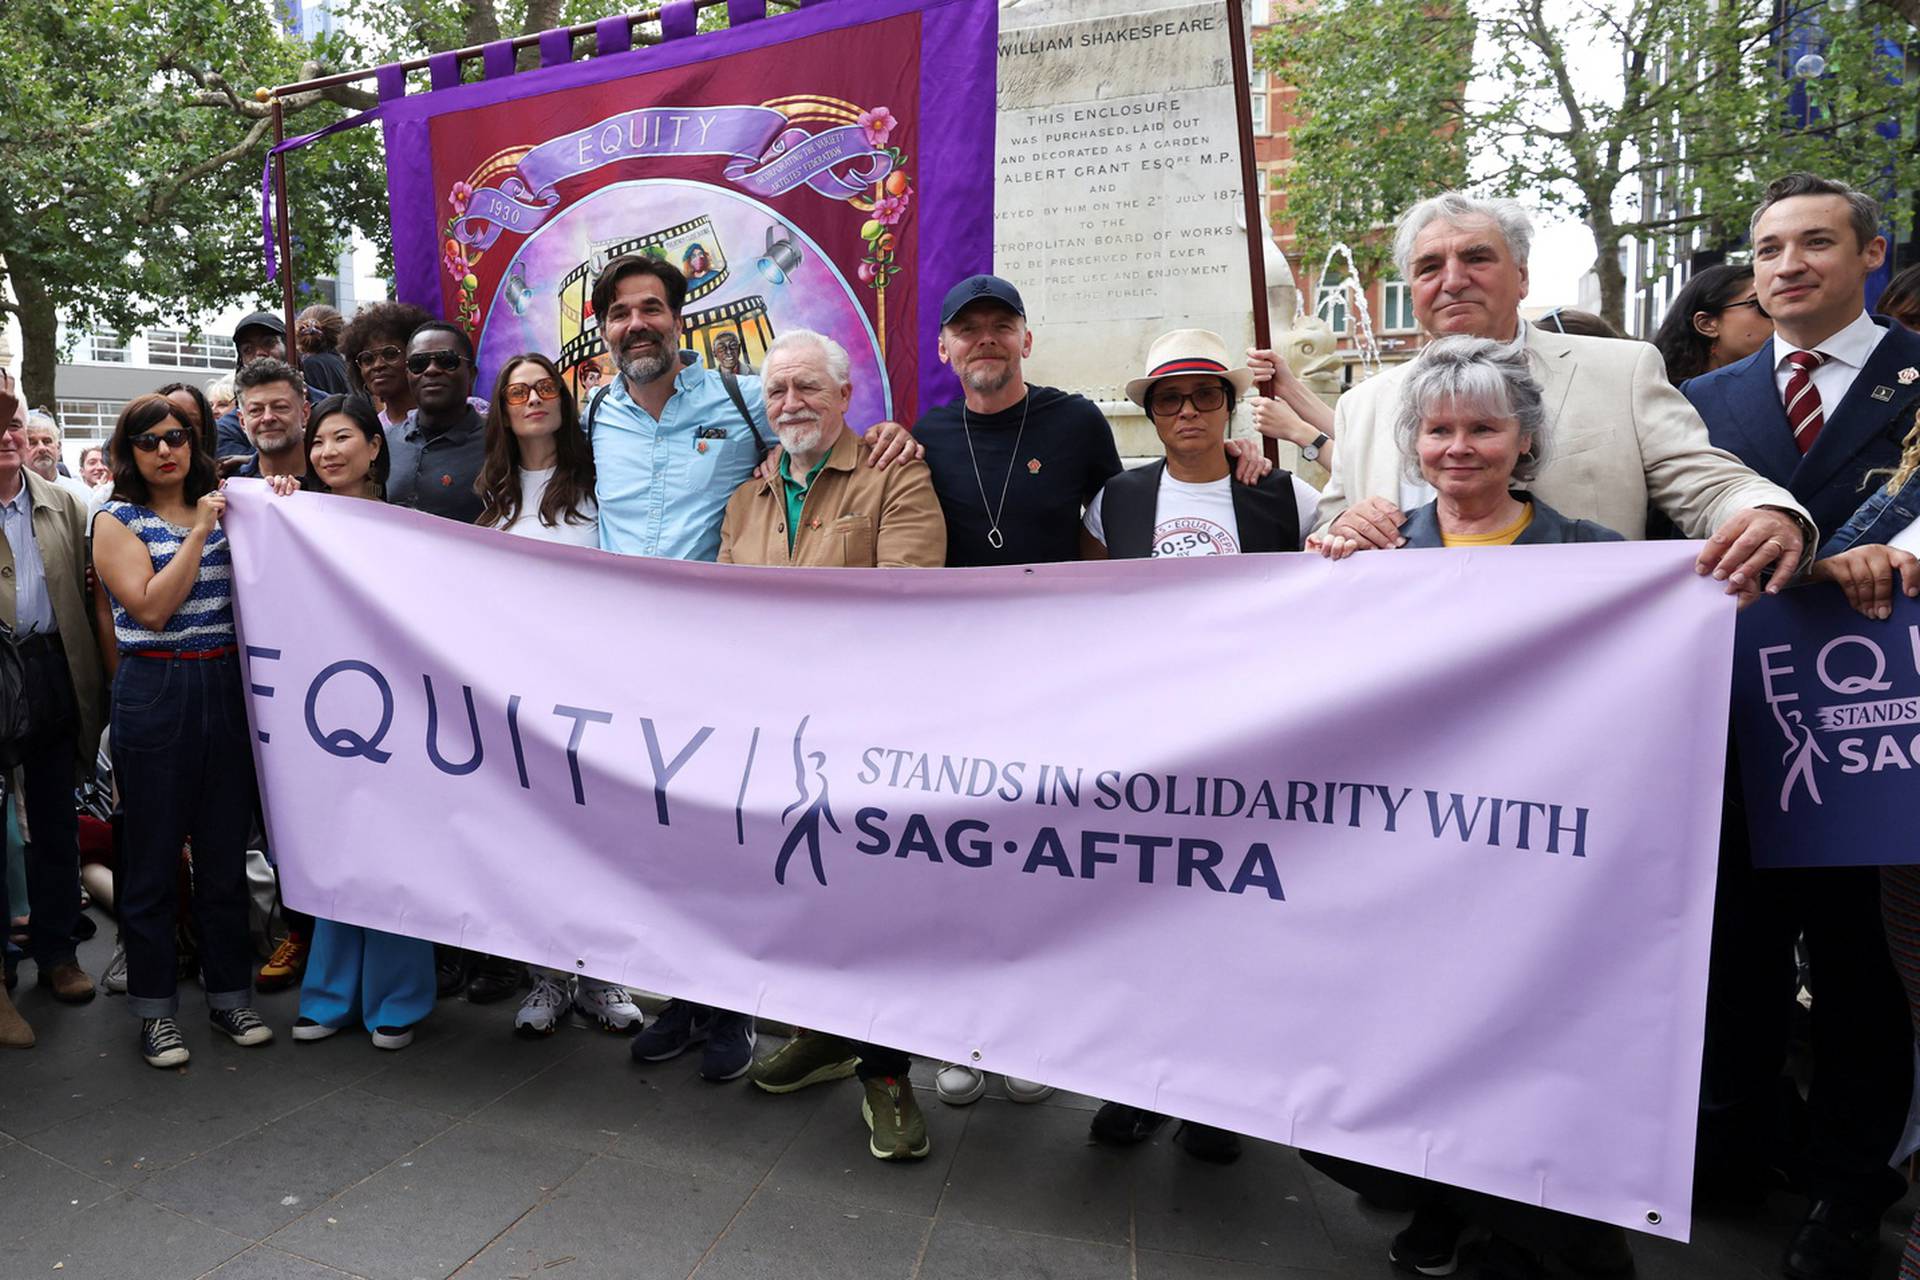 Equity rally in solidarity with the SAG-AFTRA strikes, London